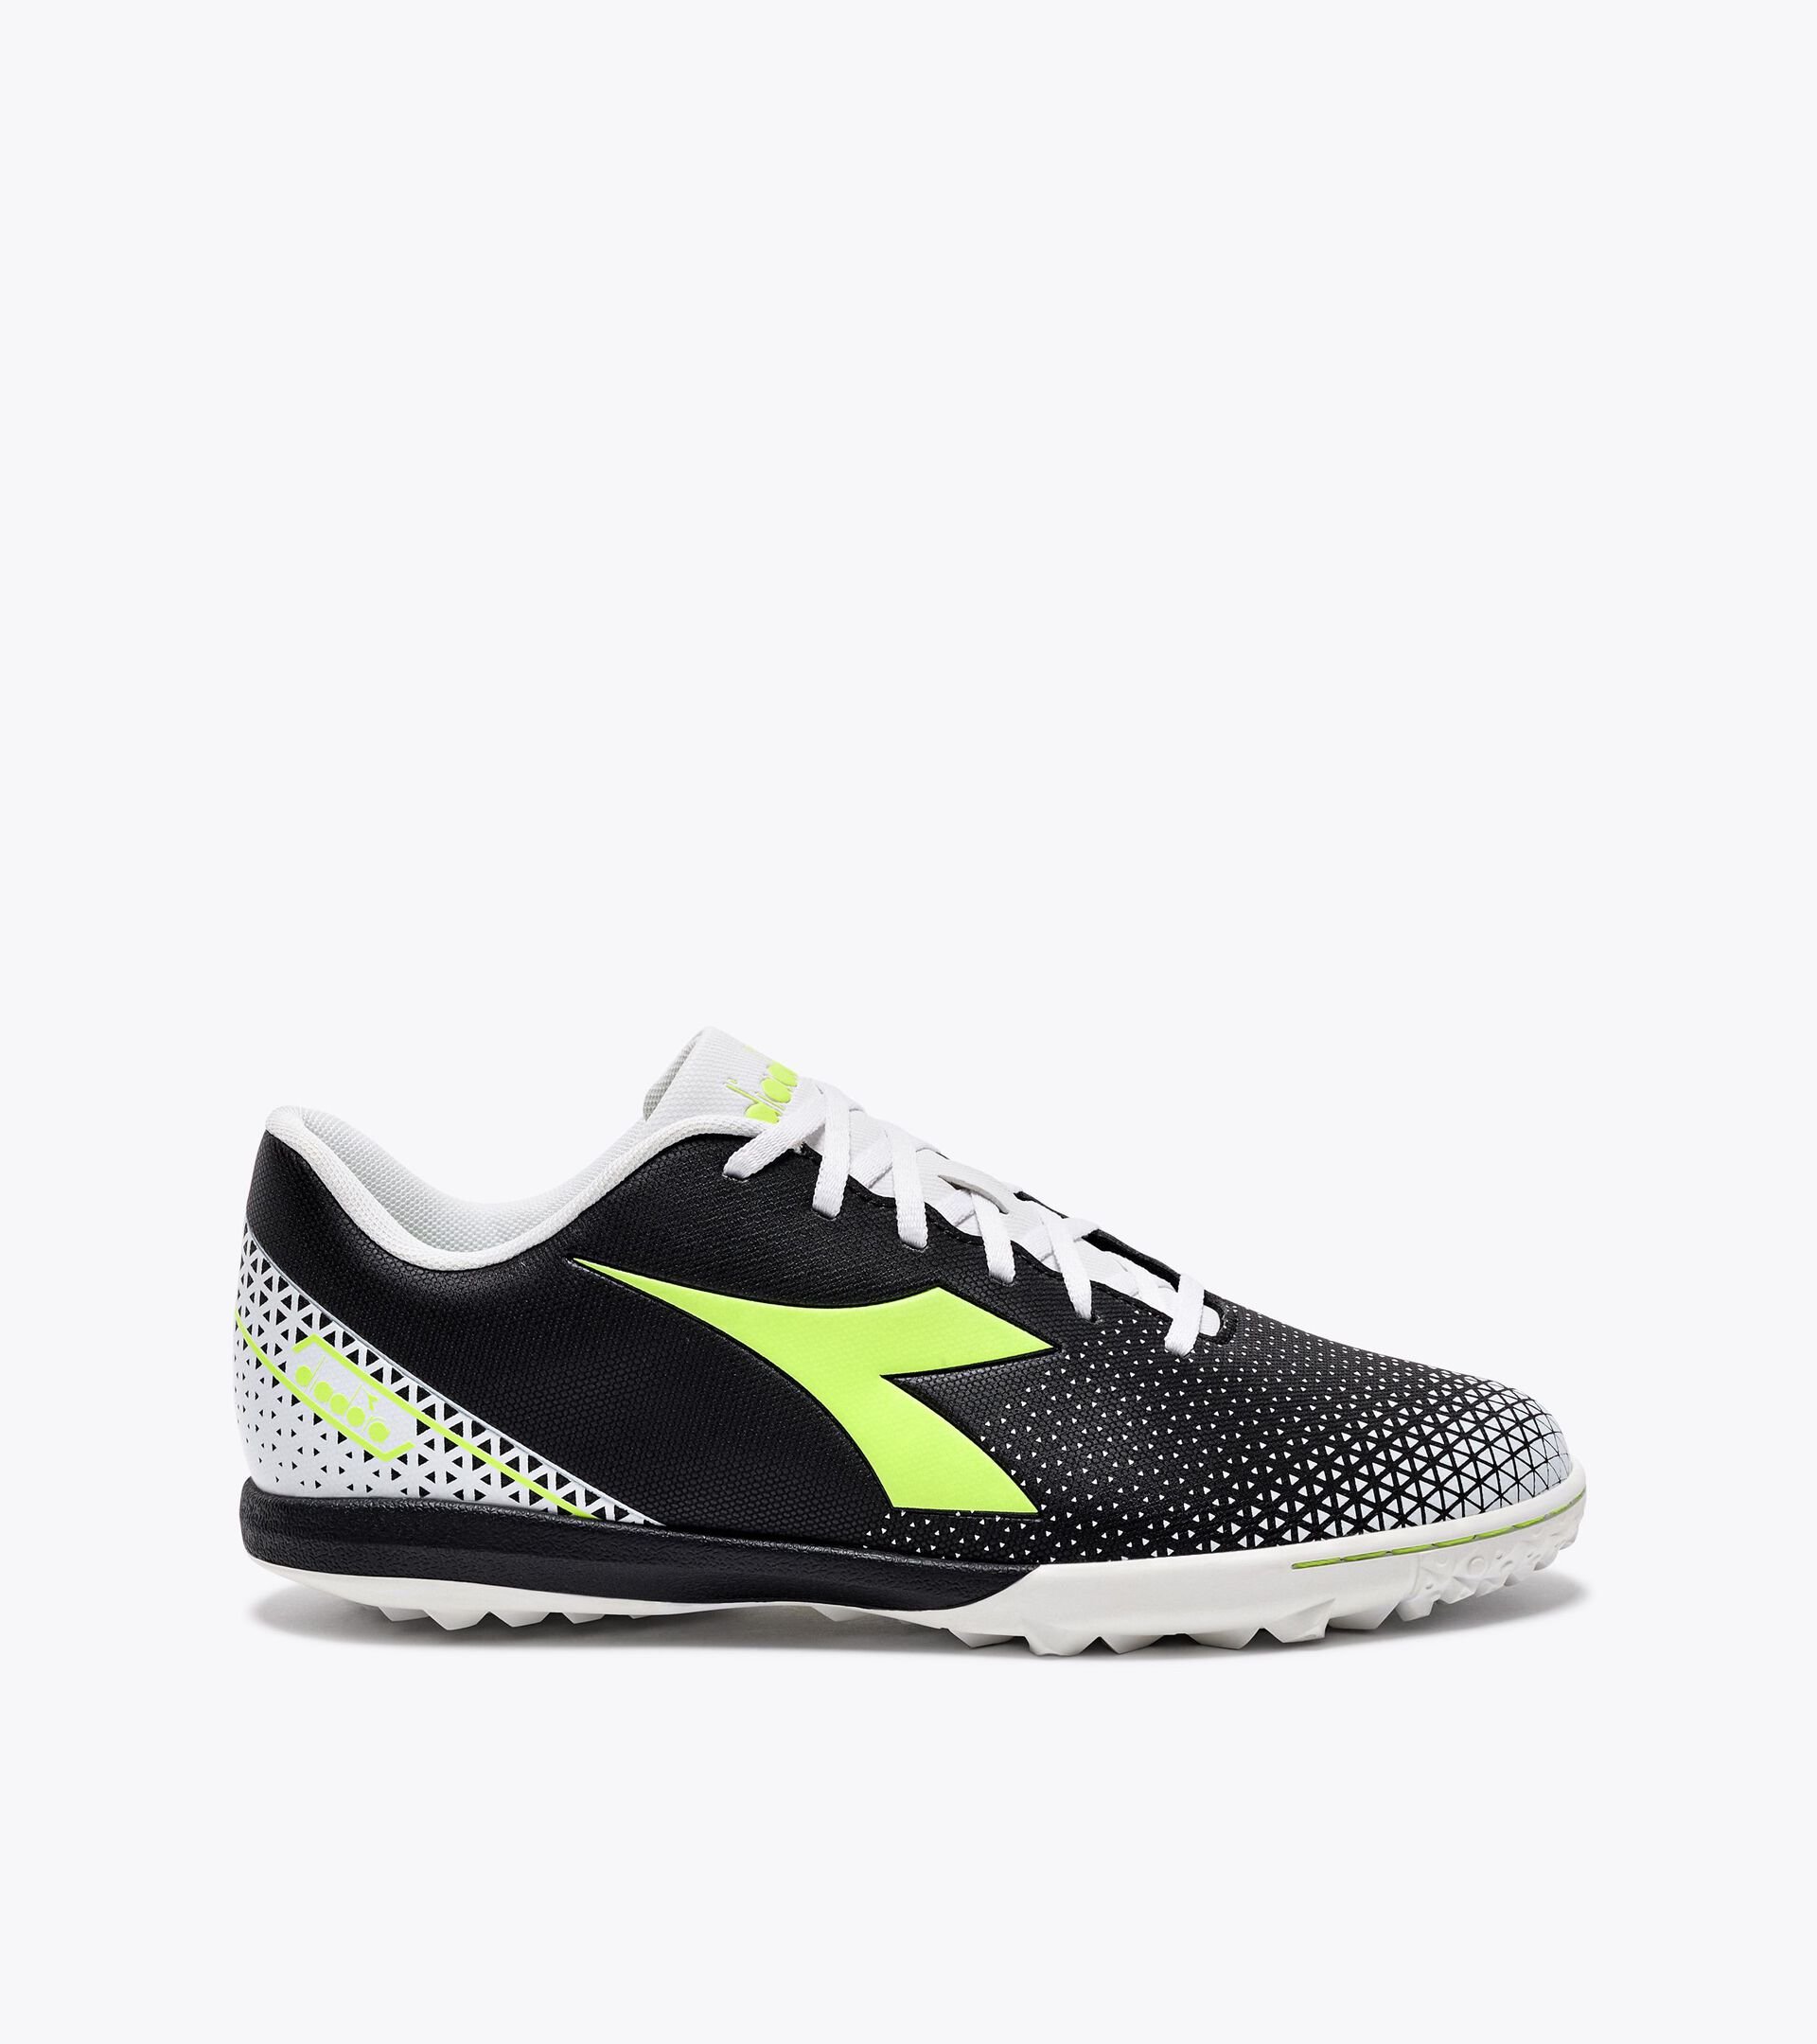 Calcio boots for synthetic turfs or firm grounds - Men PICHICHI 6 TFR BLACK/YELLOW FLUO DD/WHITE - Diadora